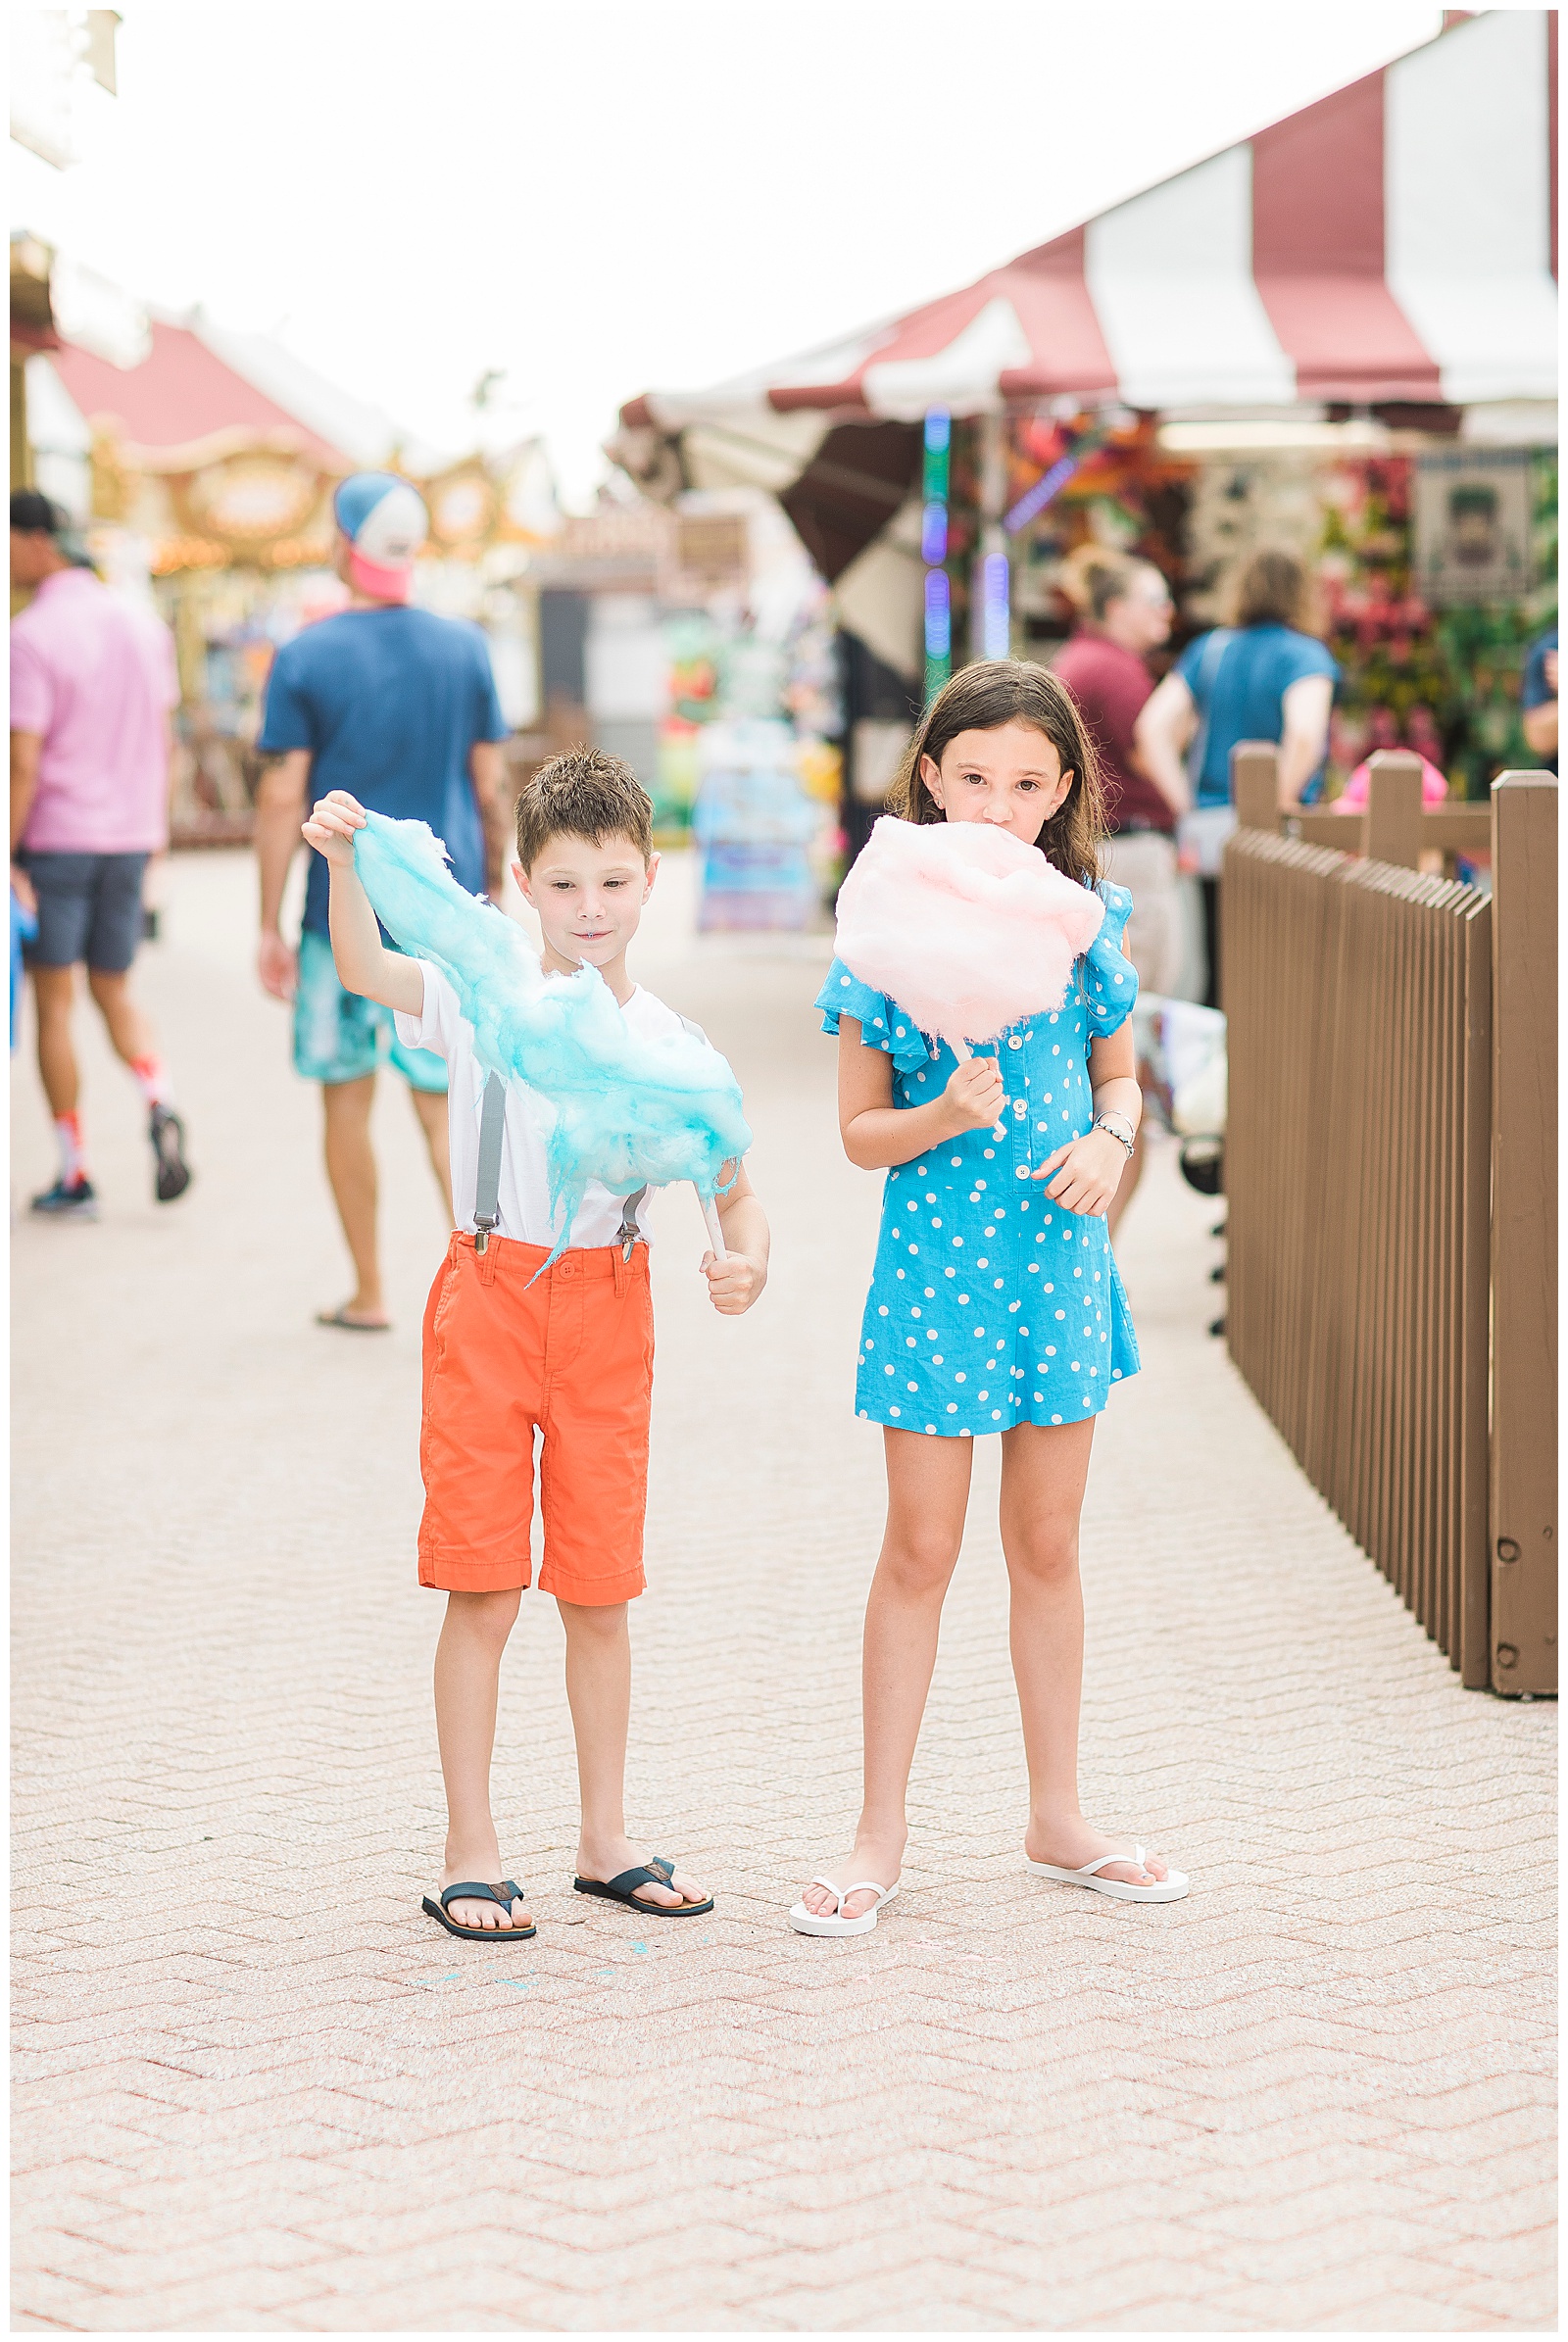 Kids photos with cotton candy